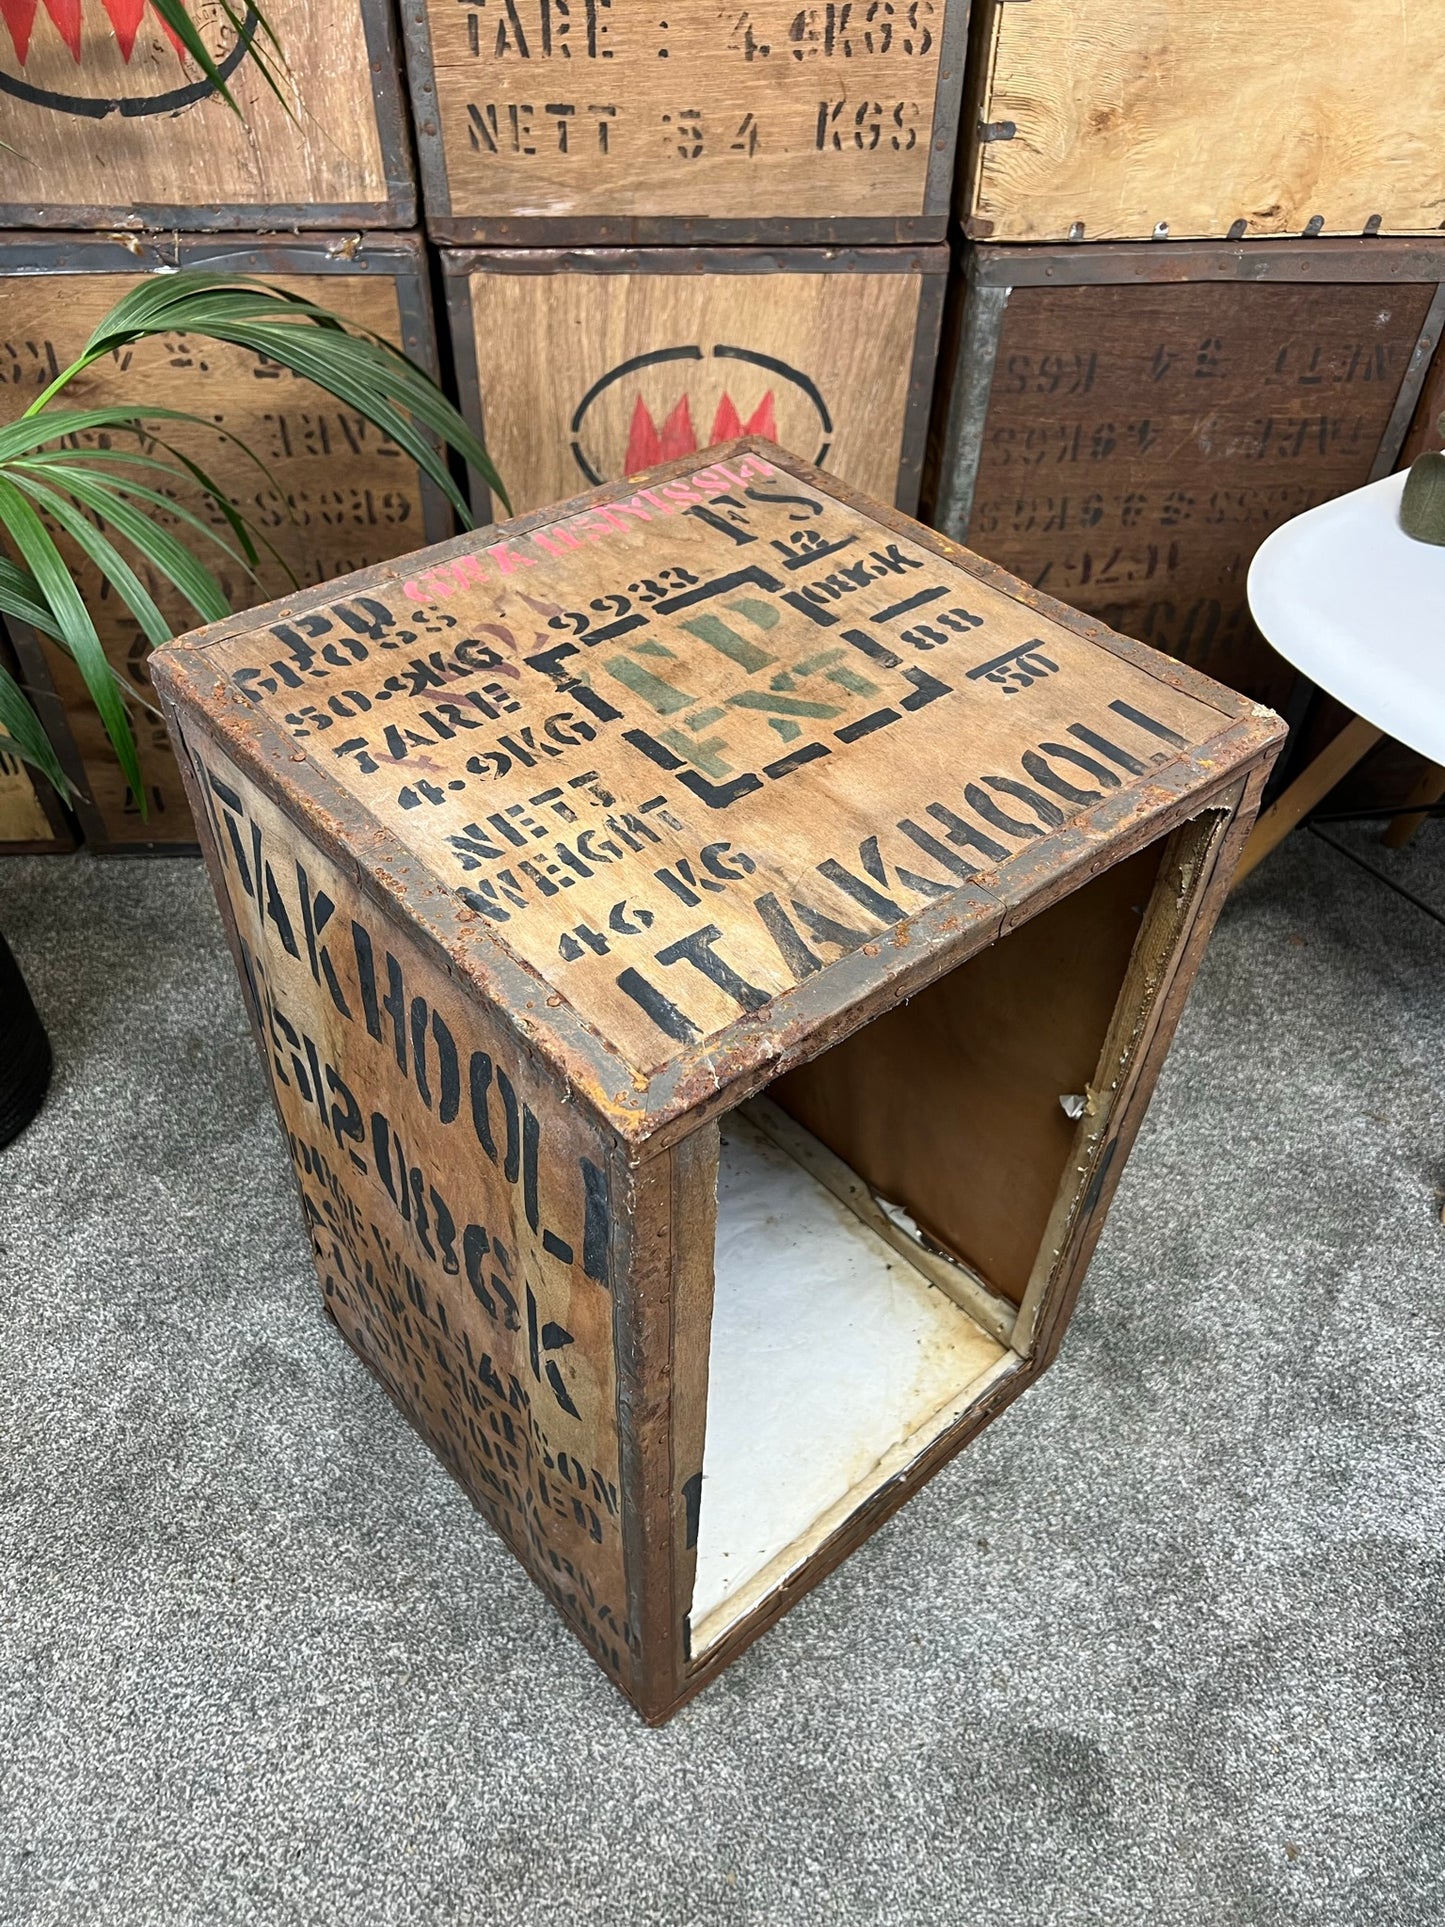 Vintage Tea Crate "It Pays To Buy Good Tea" Rustic Decor Chest Side Coffee Table Box